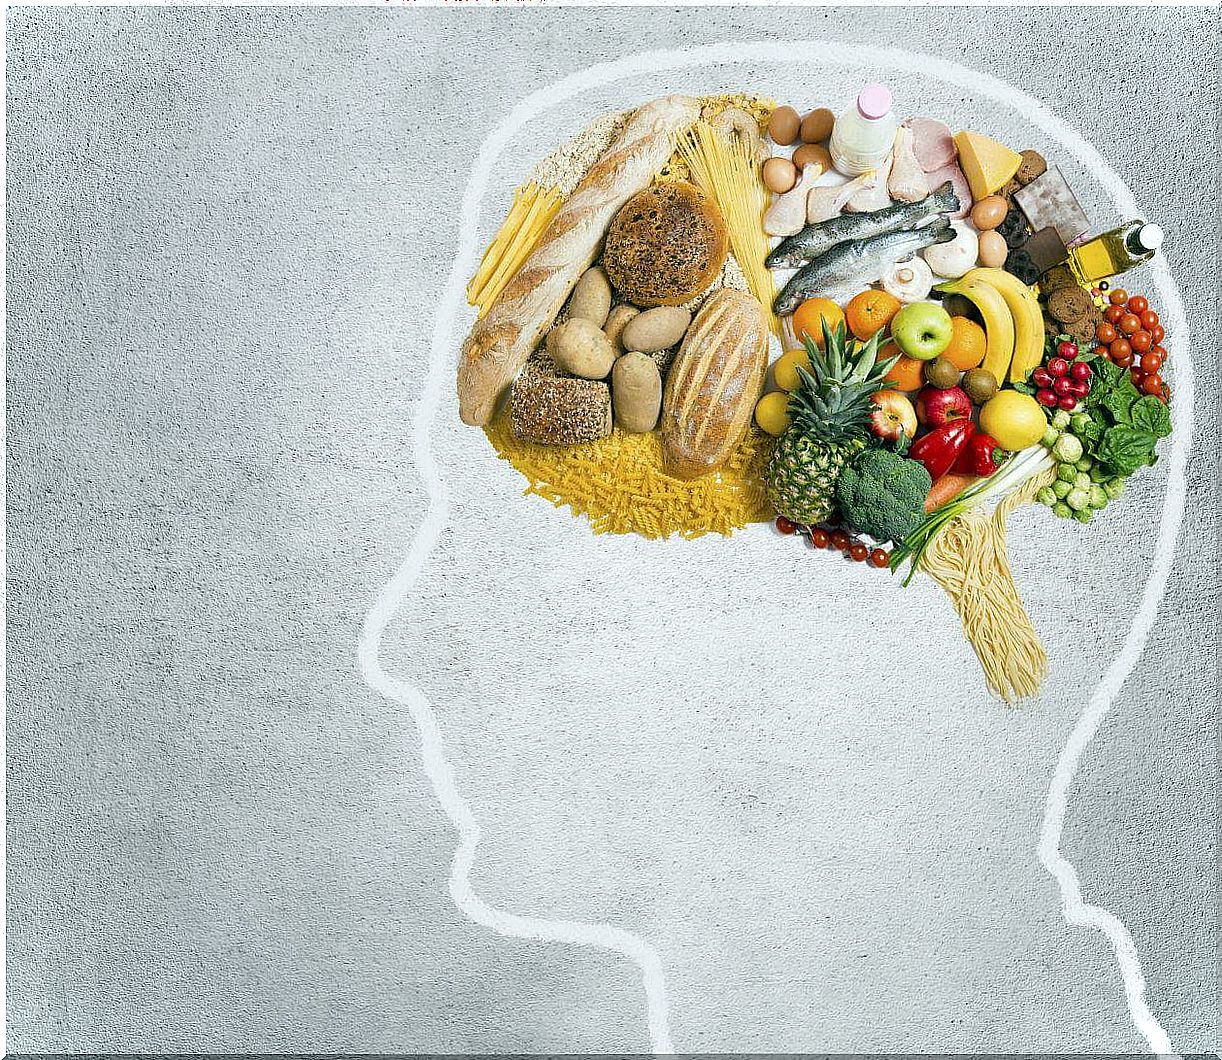 Do you know how your intelligence is related to what you eat?